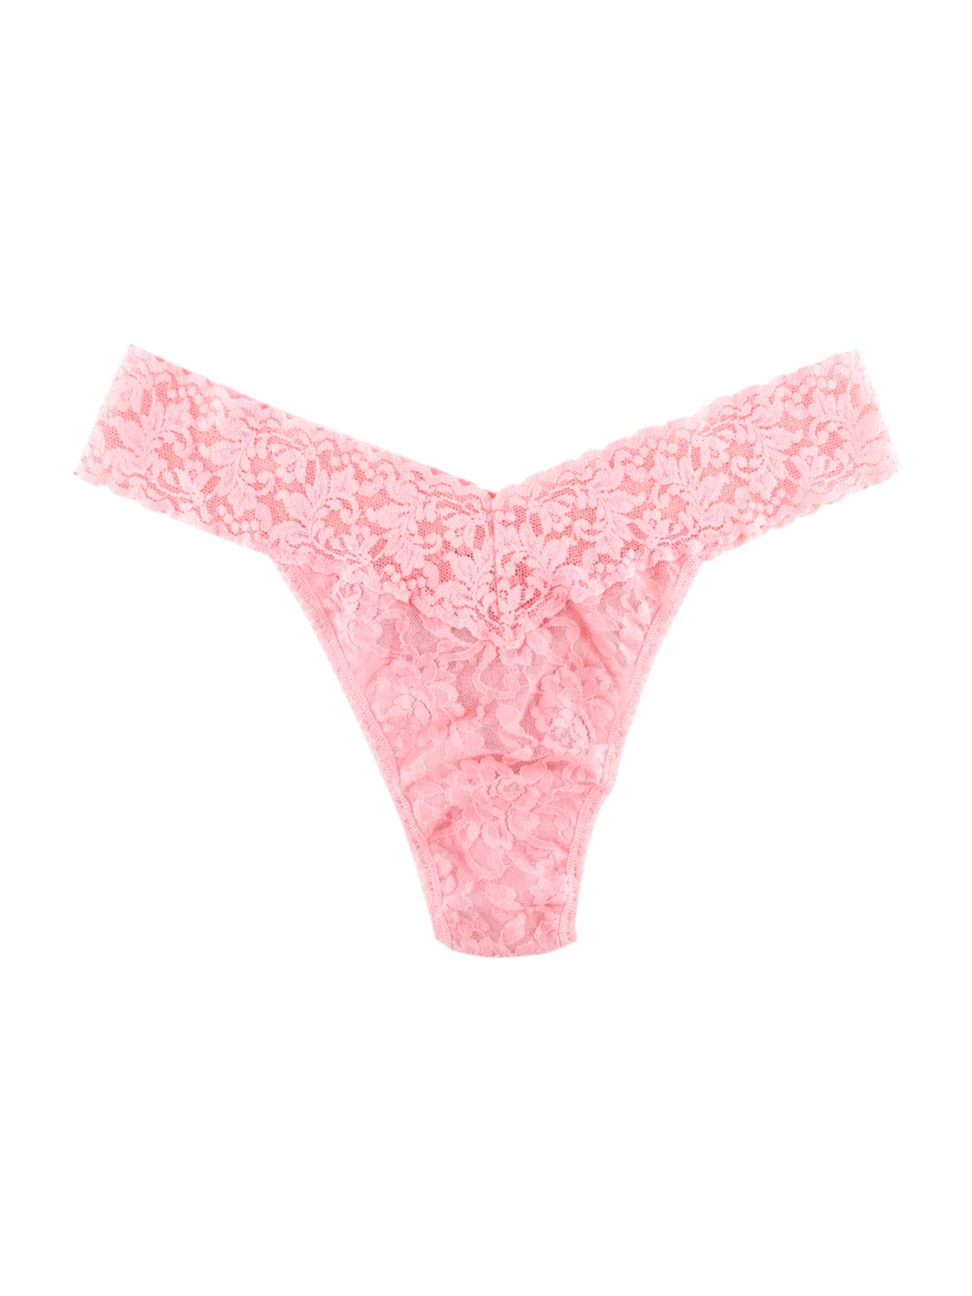 Hanky Panky origninal thong signature stretch lace